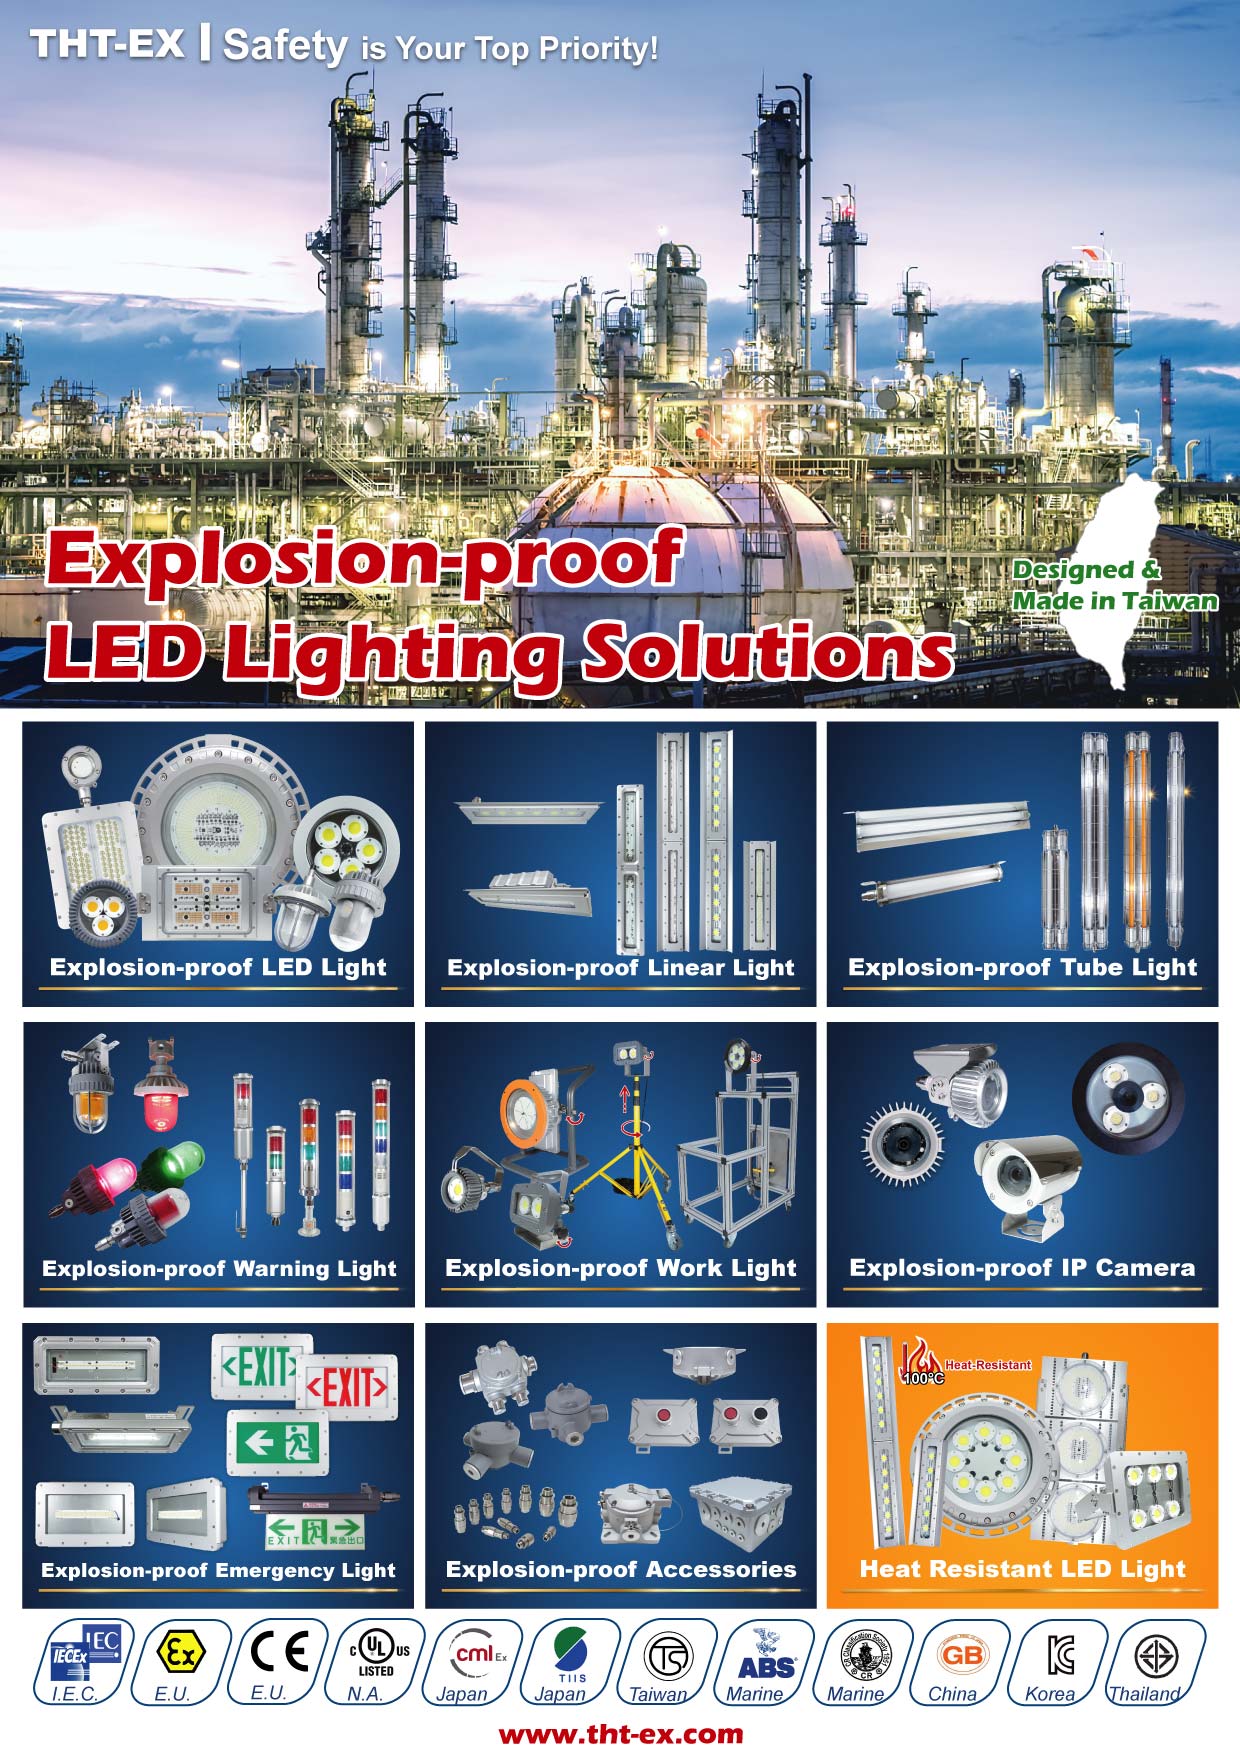 Taiwan's Leading Manufacturer of Explosion-proof LED Lights: THT-EX